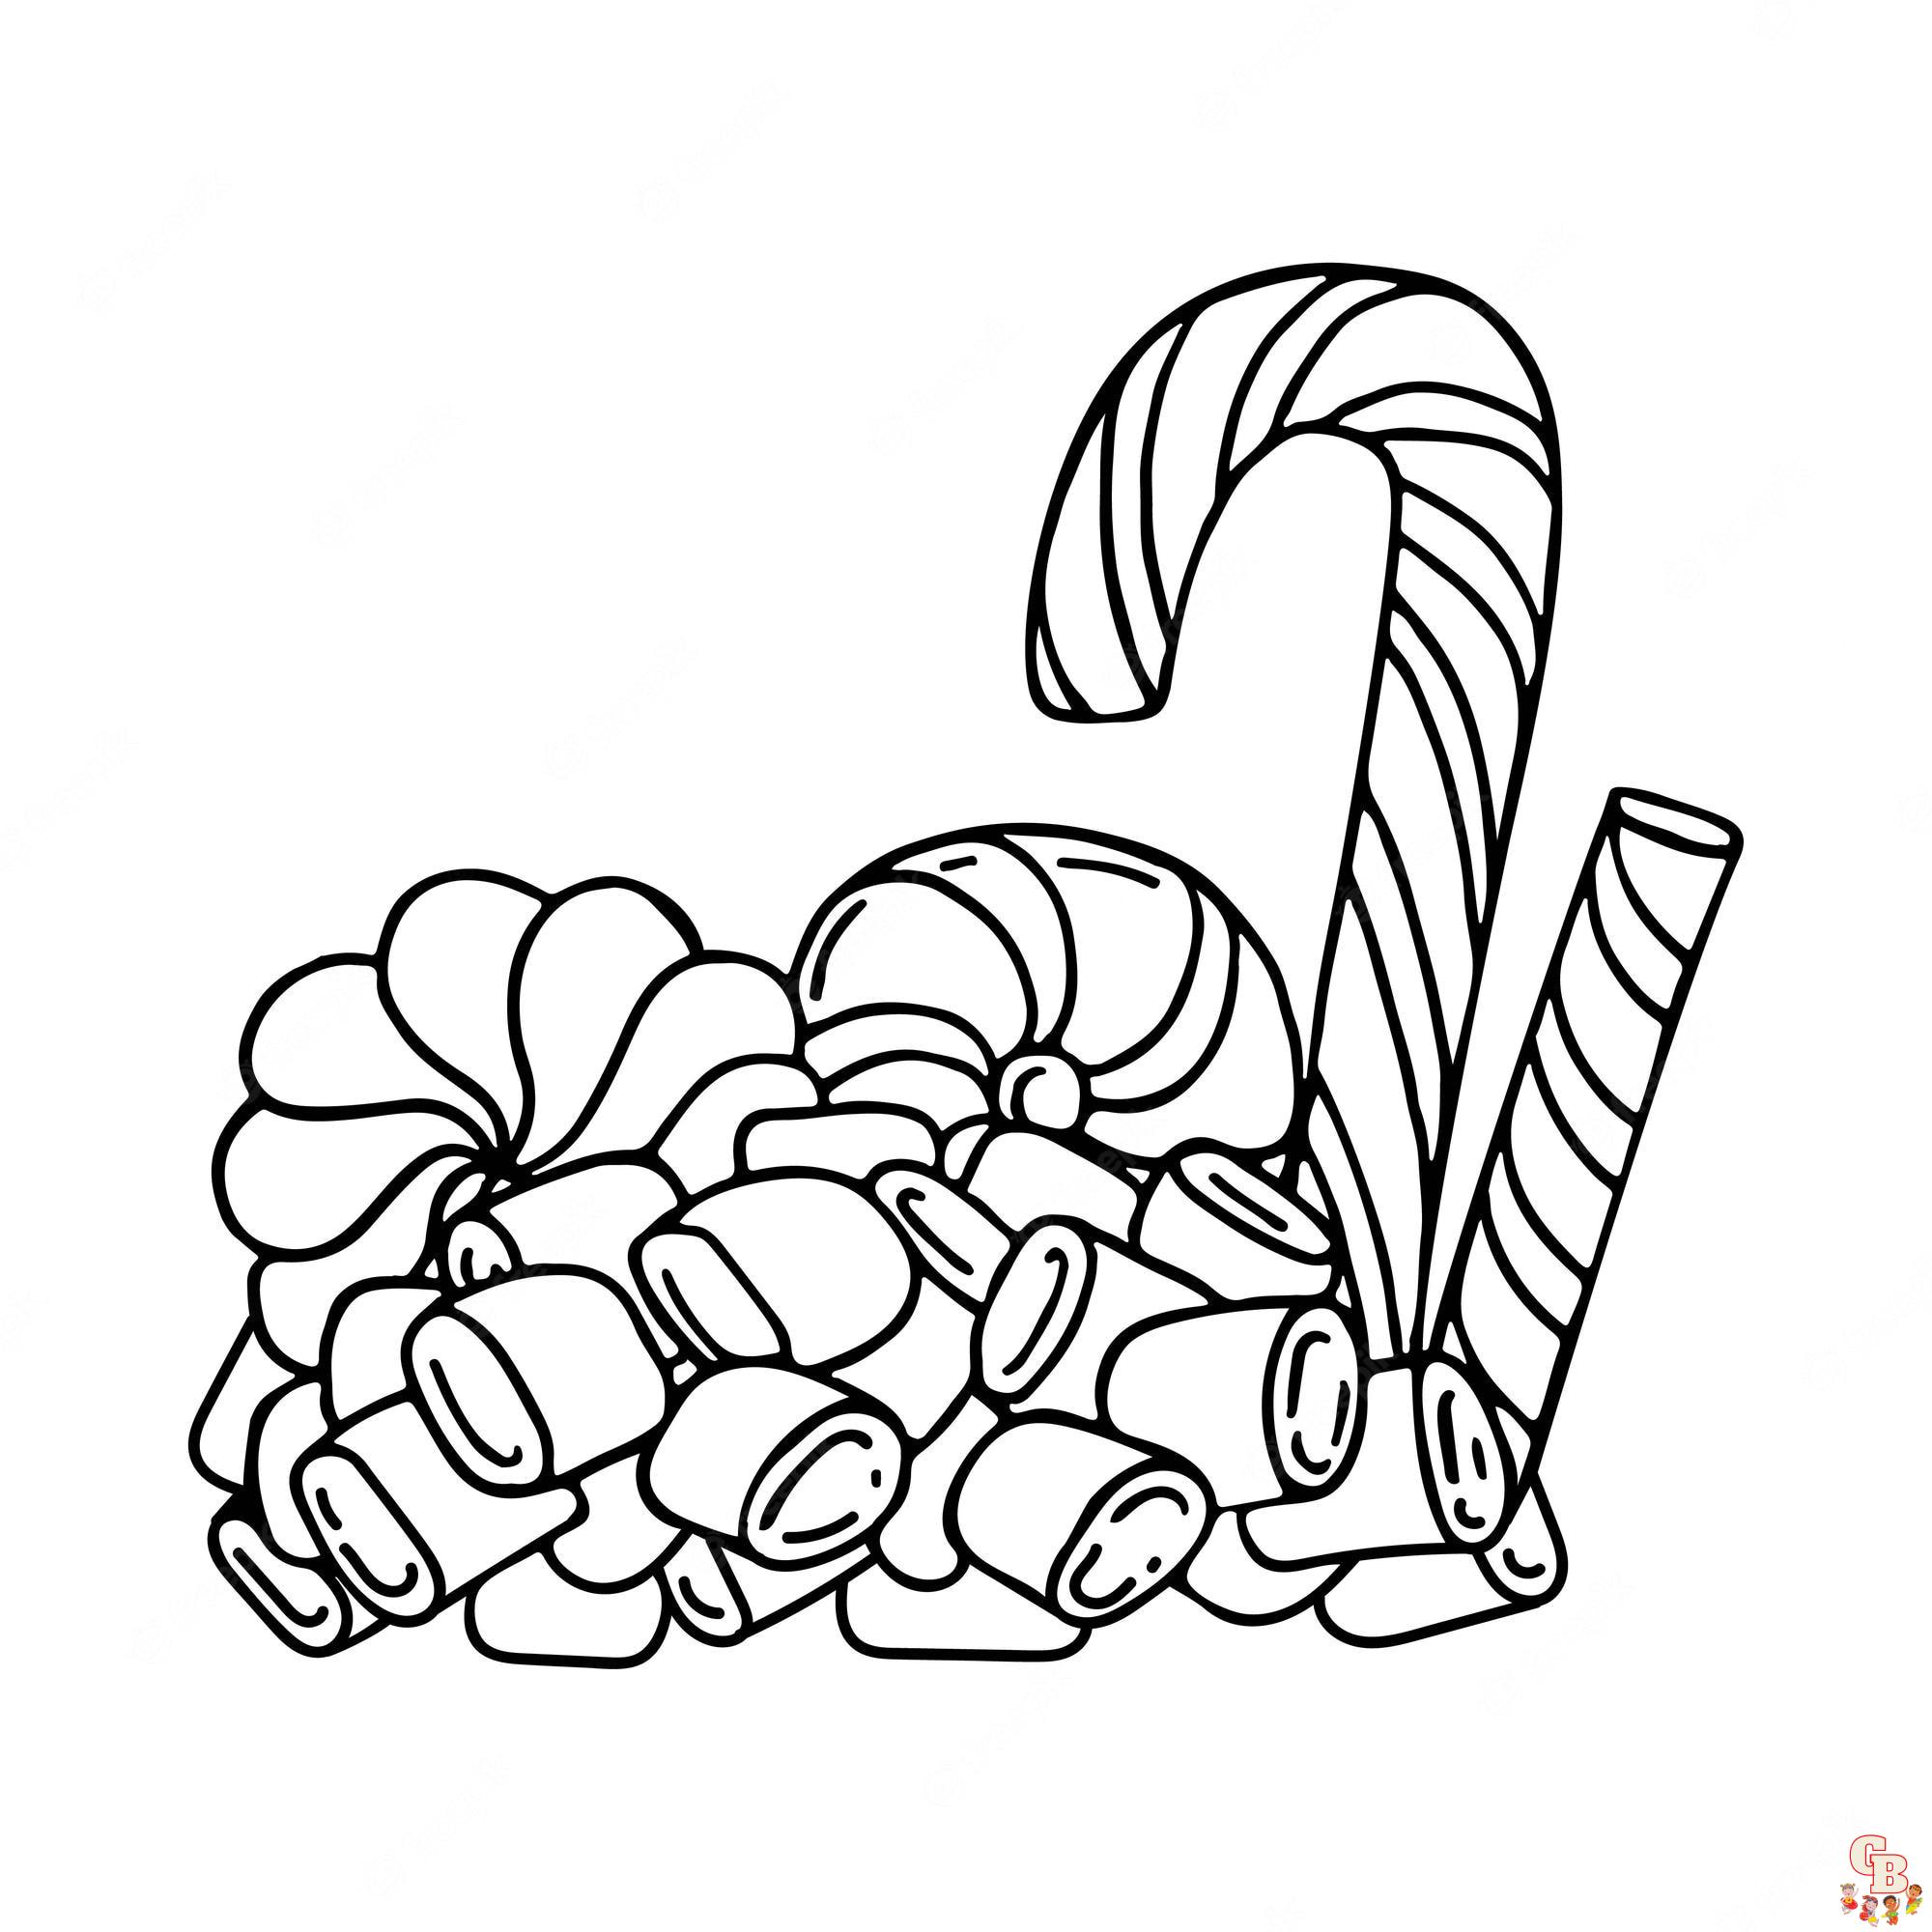 Candies Coloring Pages